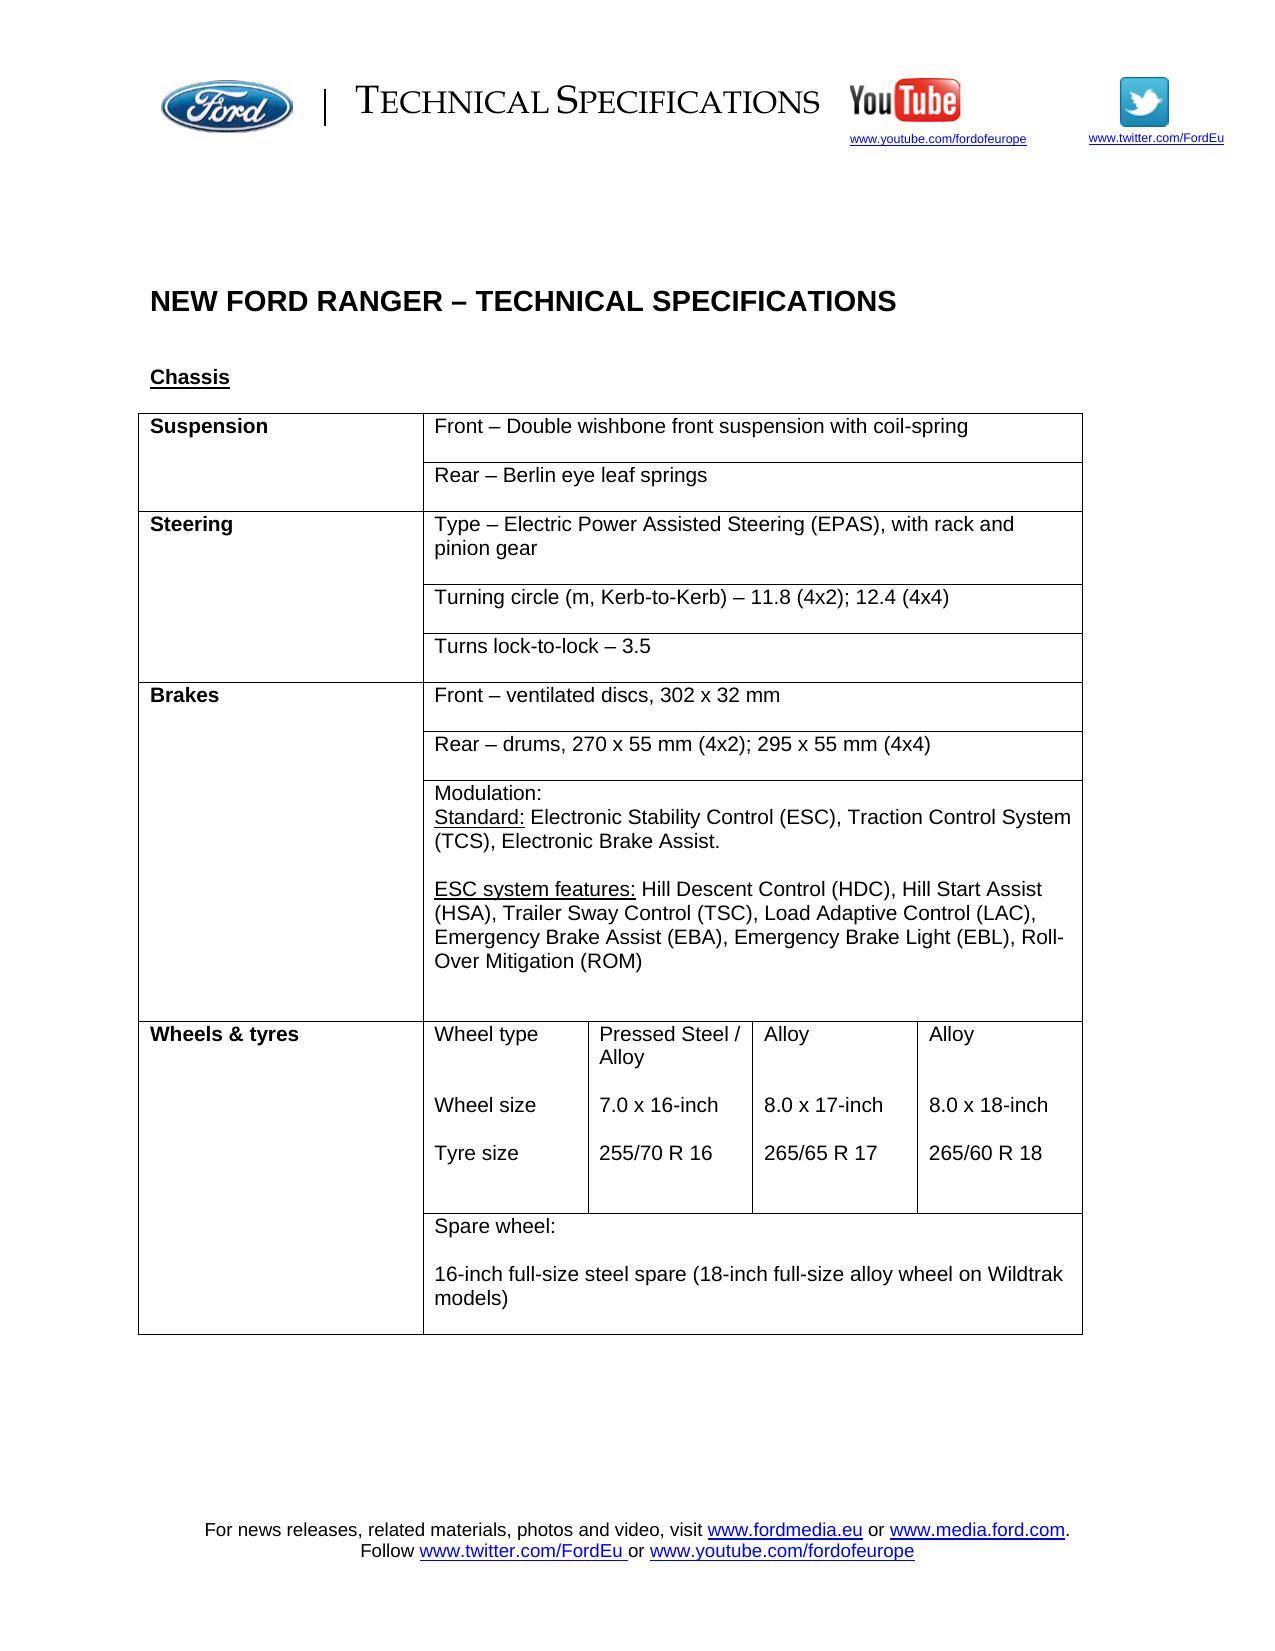 new-ford-ranger-technical-specifications.pdf